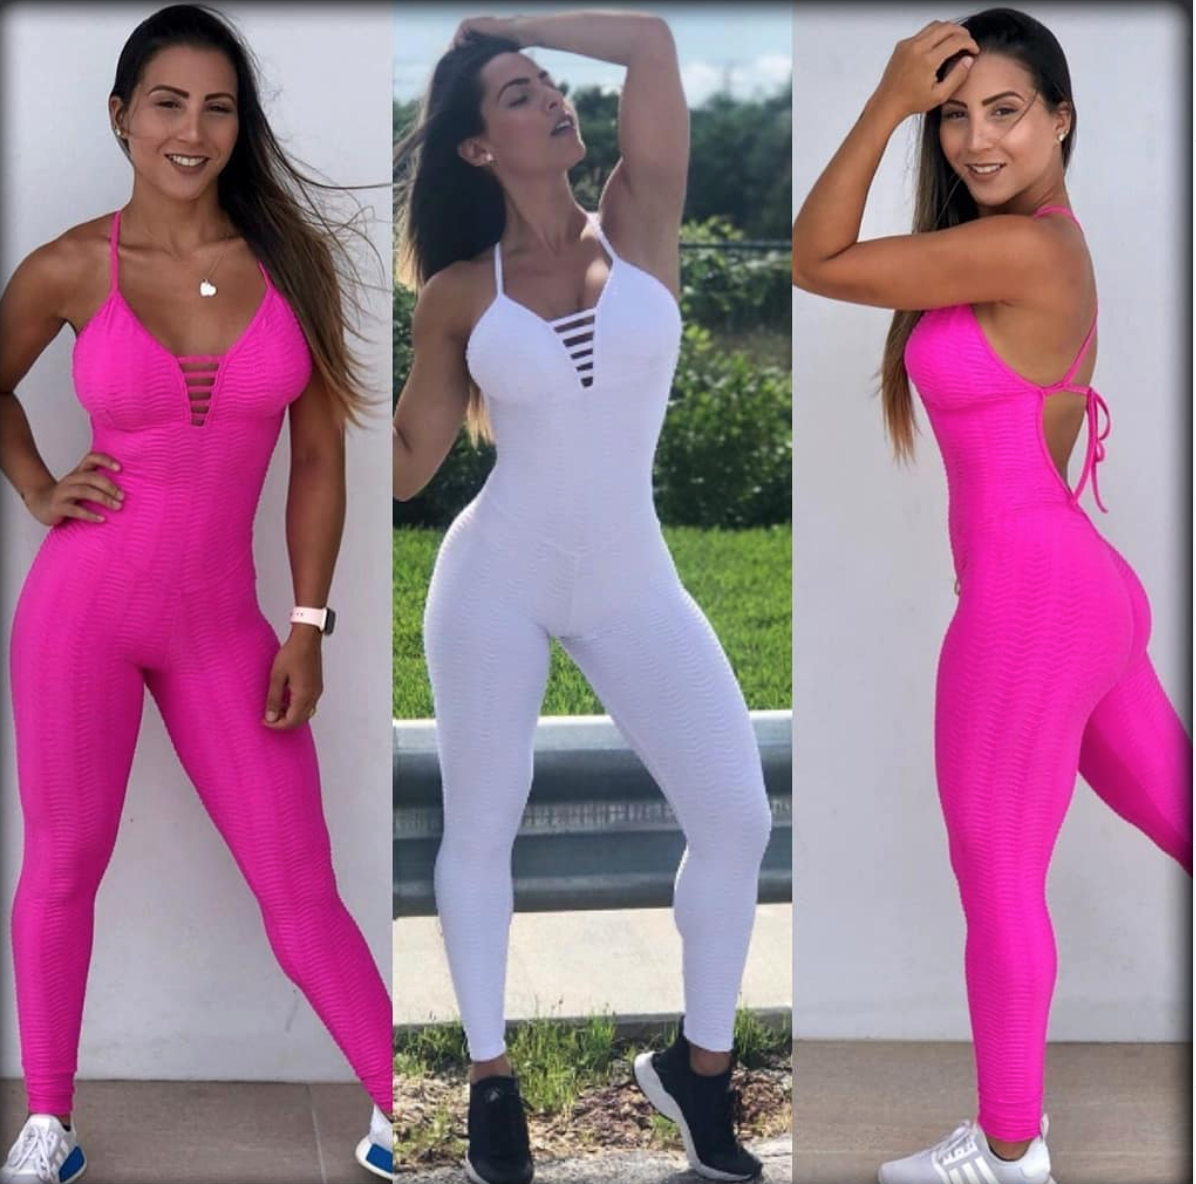 Jumpsuit One Piece/Rompers Archives - Best Fit by Brazil - Let's Gym  Fitness - Dynamite Brazil Leggings USA - Alo Yoga Leggings Sexy Workout  Clothes - Superhot Leggings - LaBellaMafia Clothes